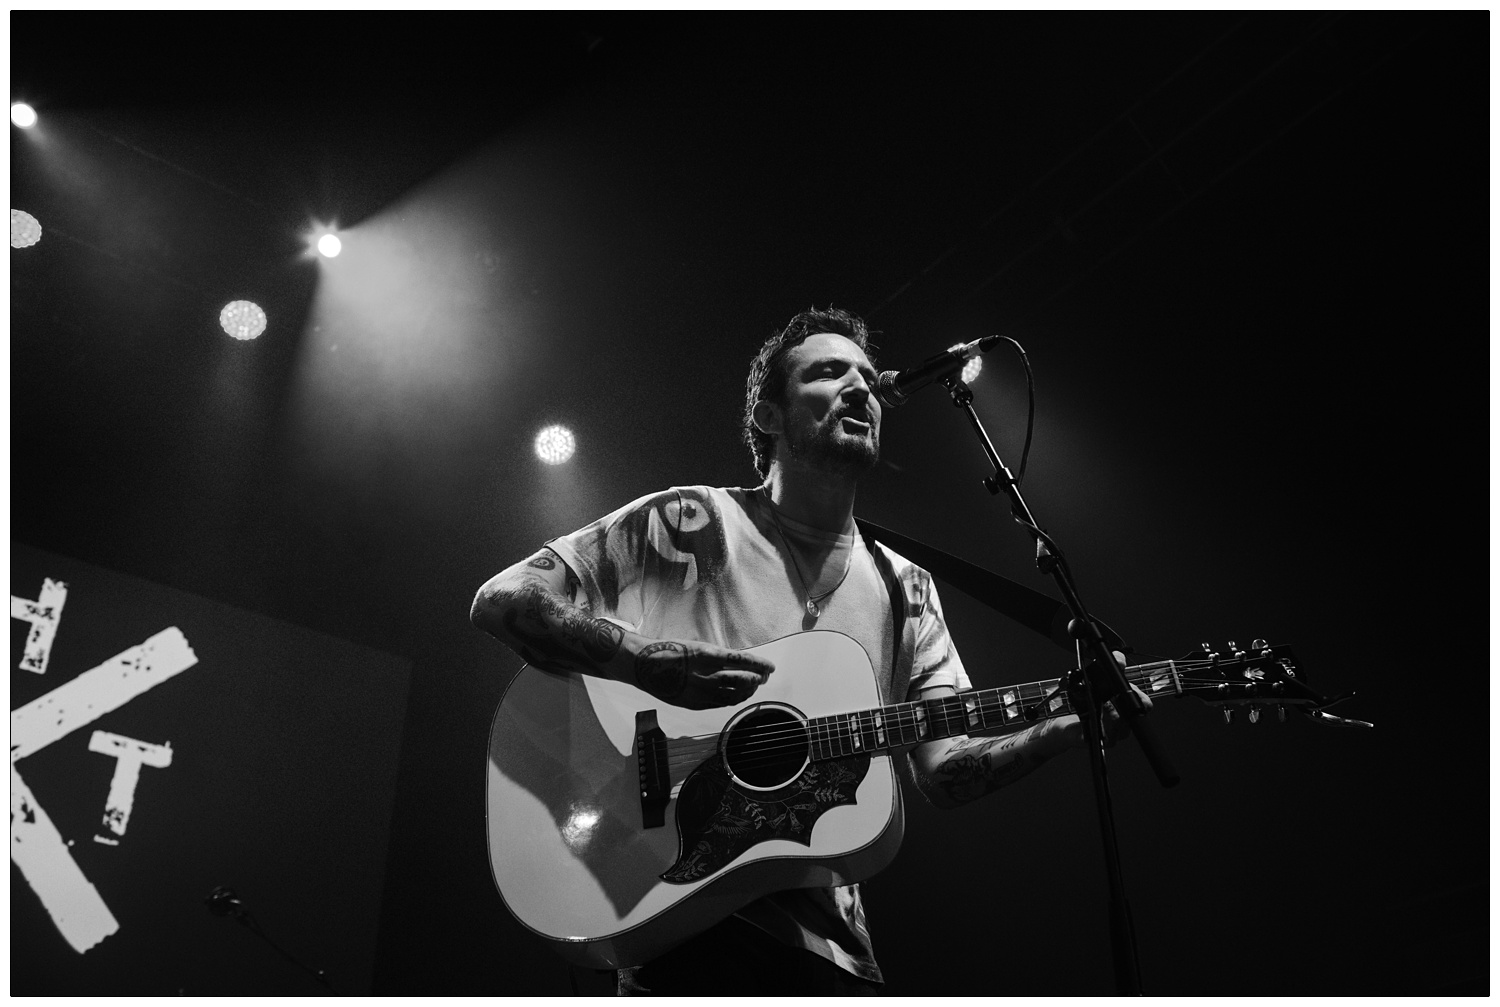 Frank Turner performing at A Peaceful Noise